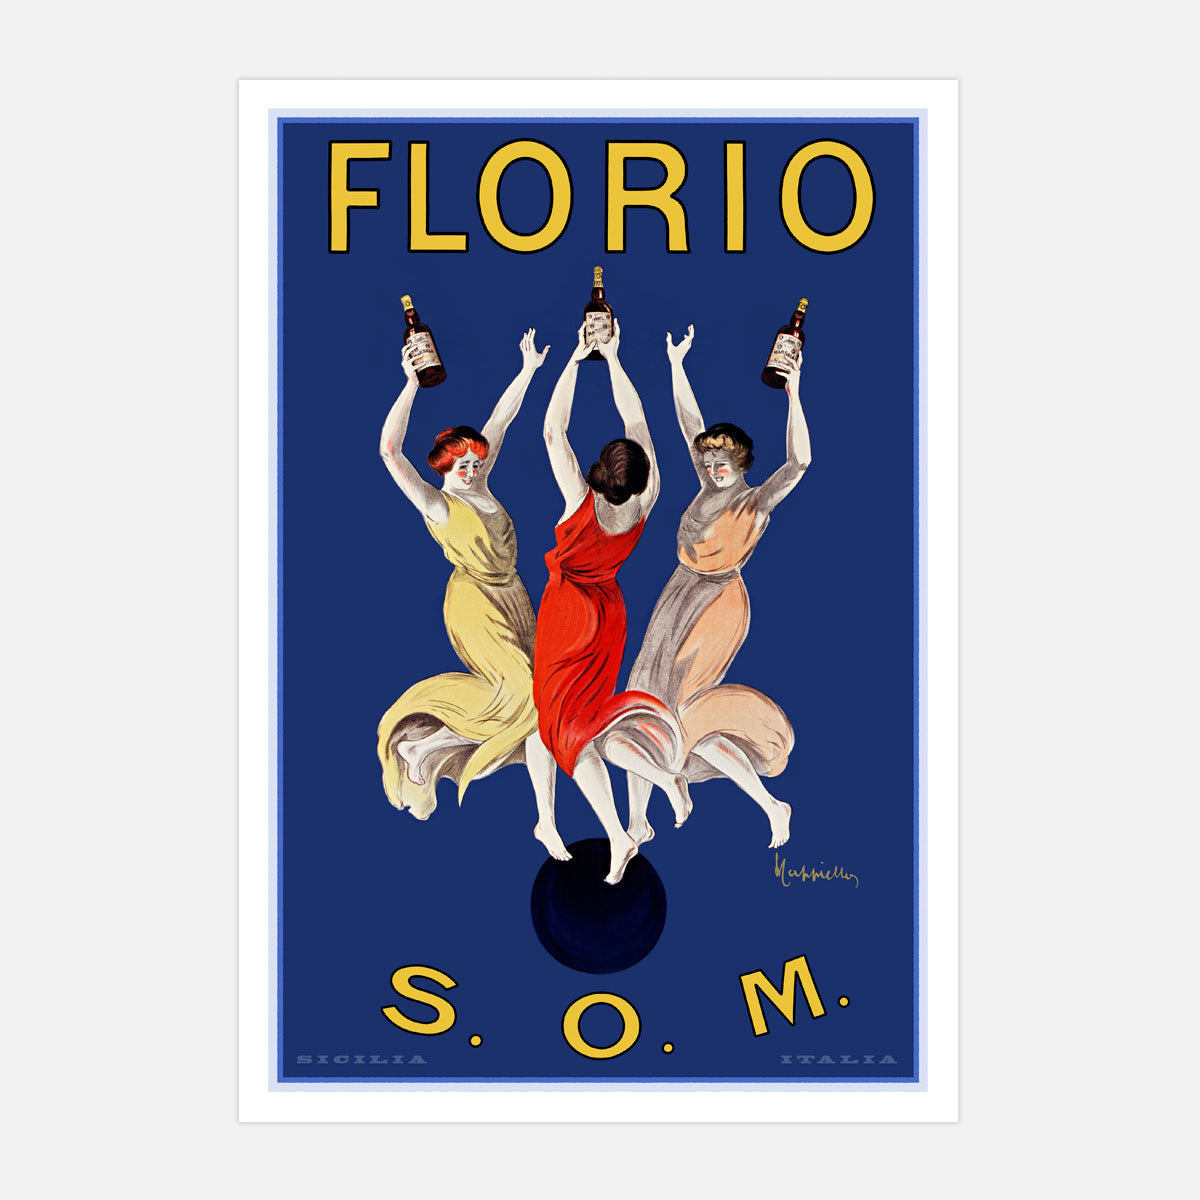 Florio Marsala vintage retro advertising poster from Places We Luv